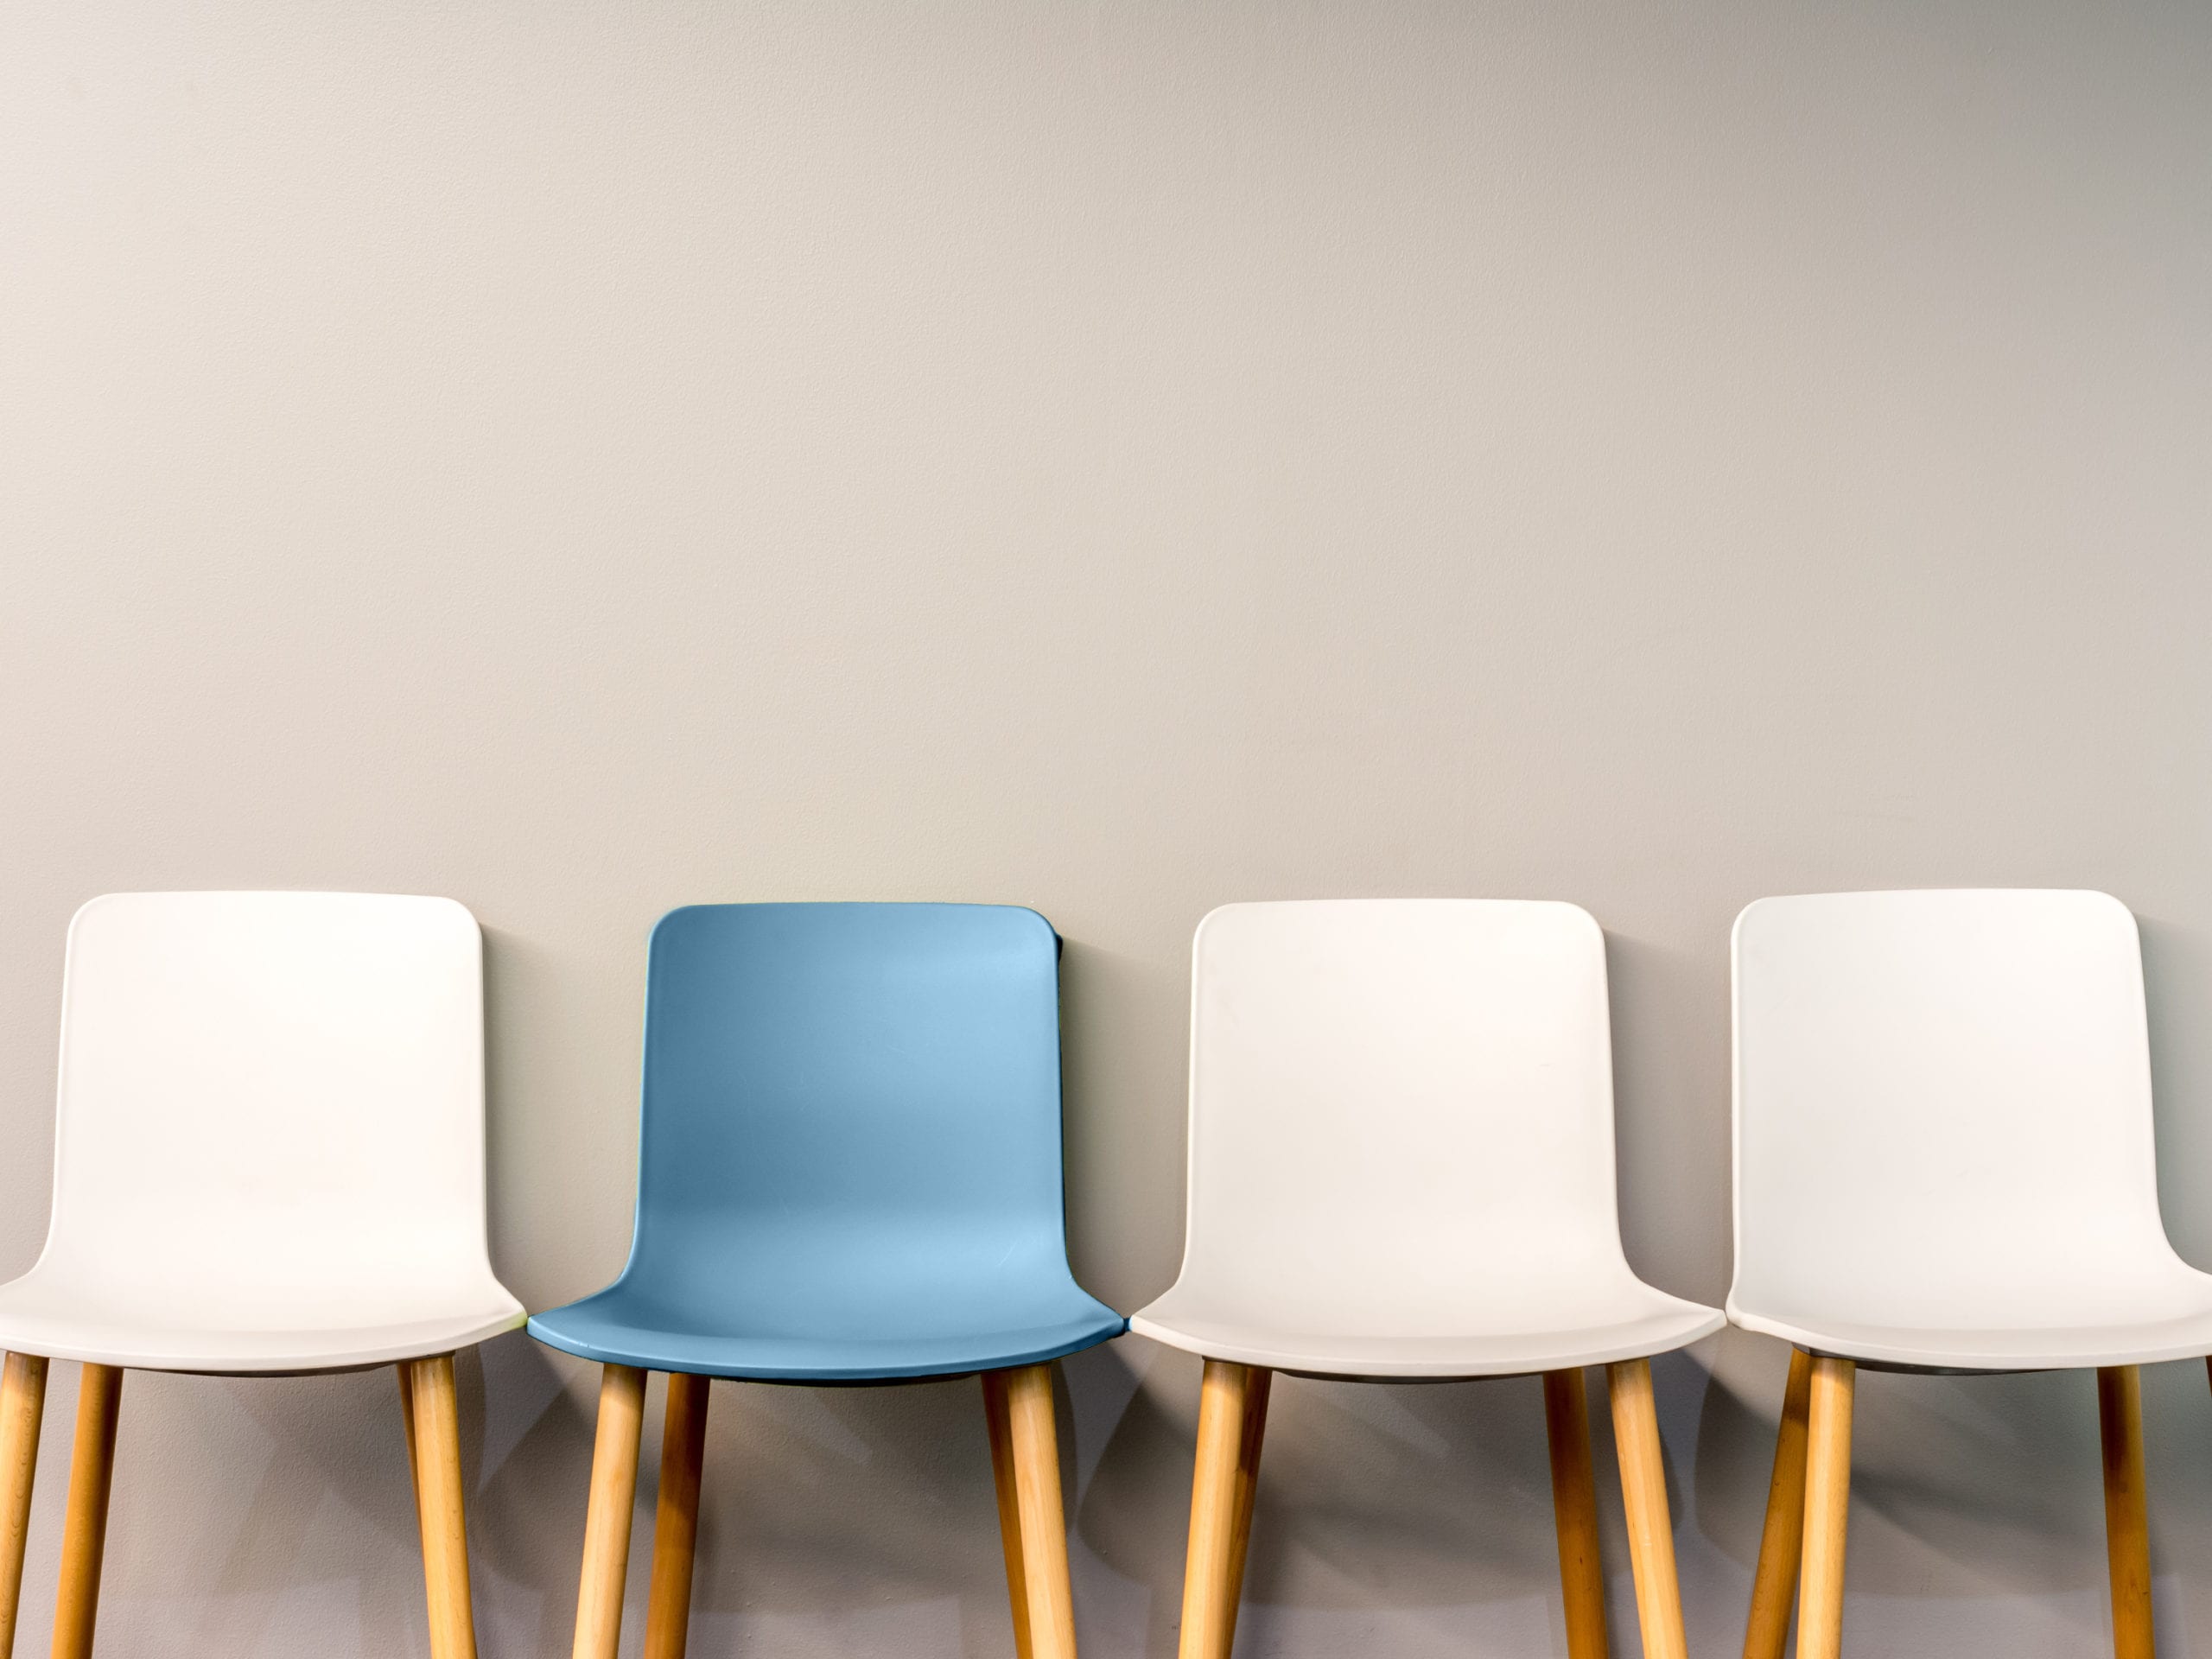 Office chairs. Find out about career opportunities for attorneys, paralegals, legal assistants and more at Rasmussen Dickey Moore's offices in Kansas City, St. Louis, and Los Angeles.